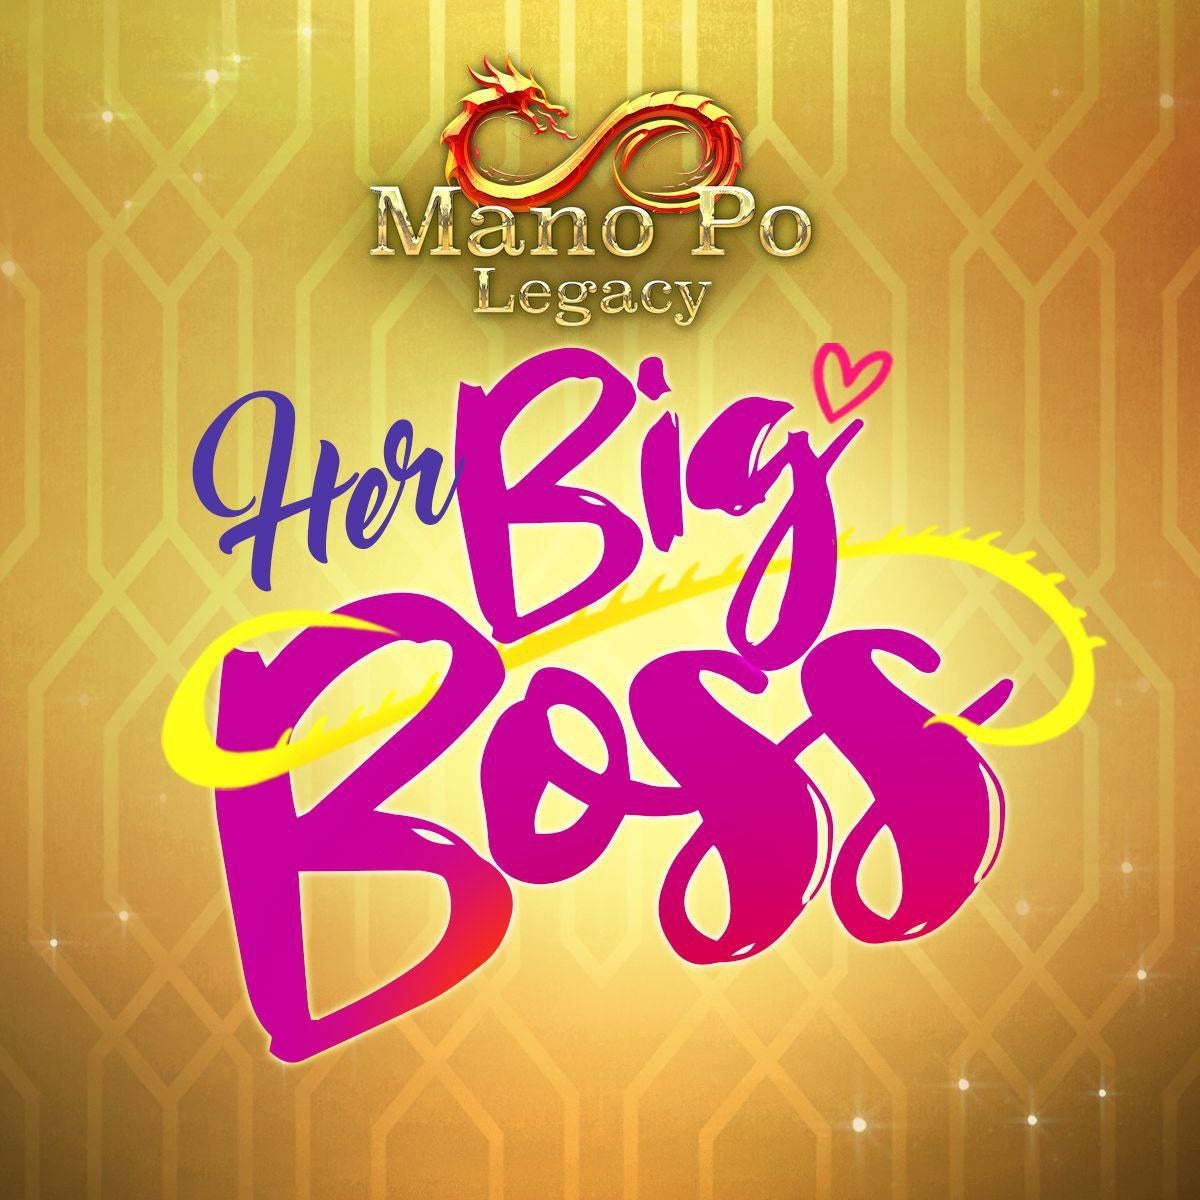 TV ratings for Mano Po Legacy: Her Big Boss in Malaysia. GMA TV series